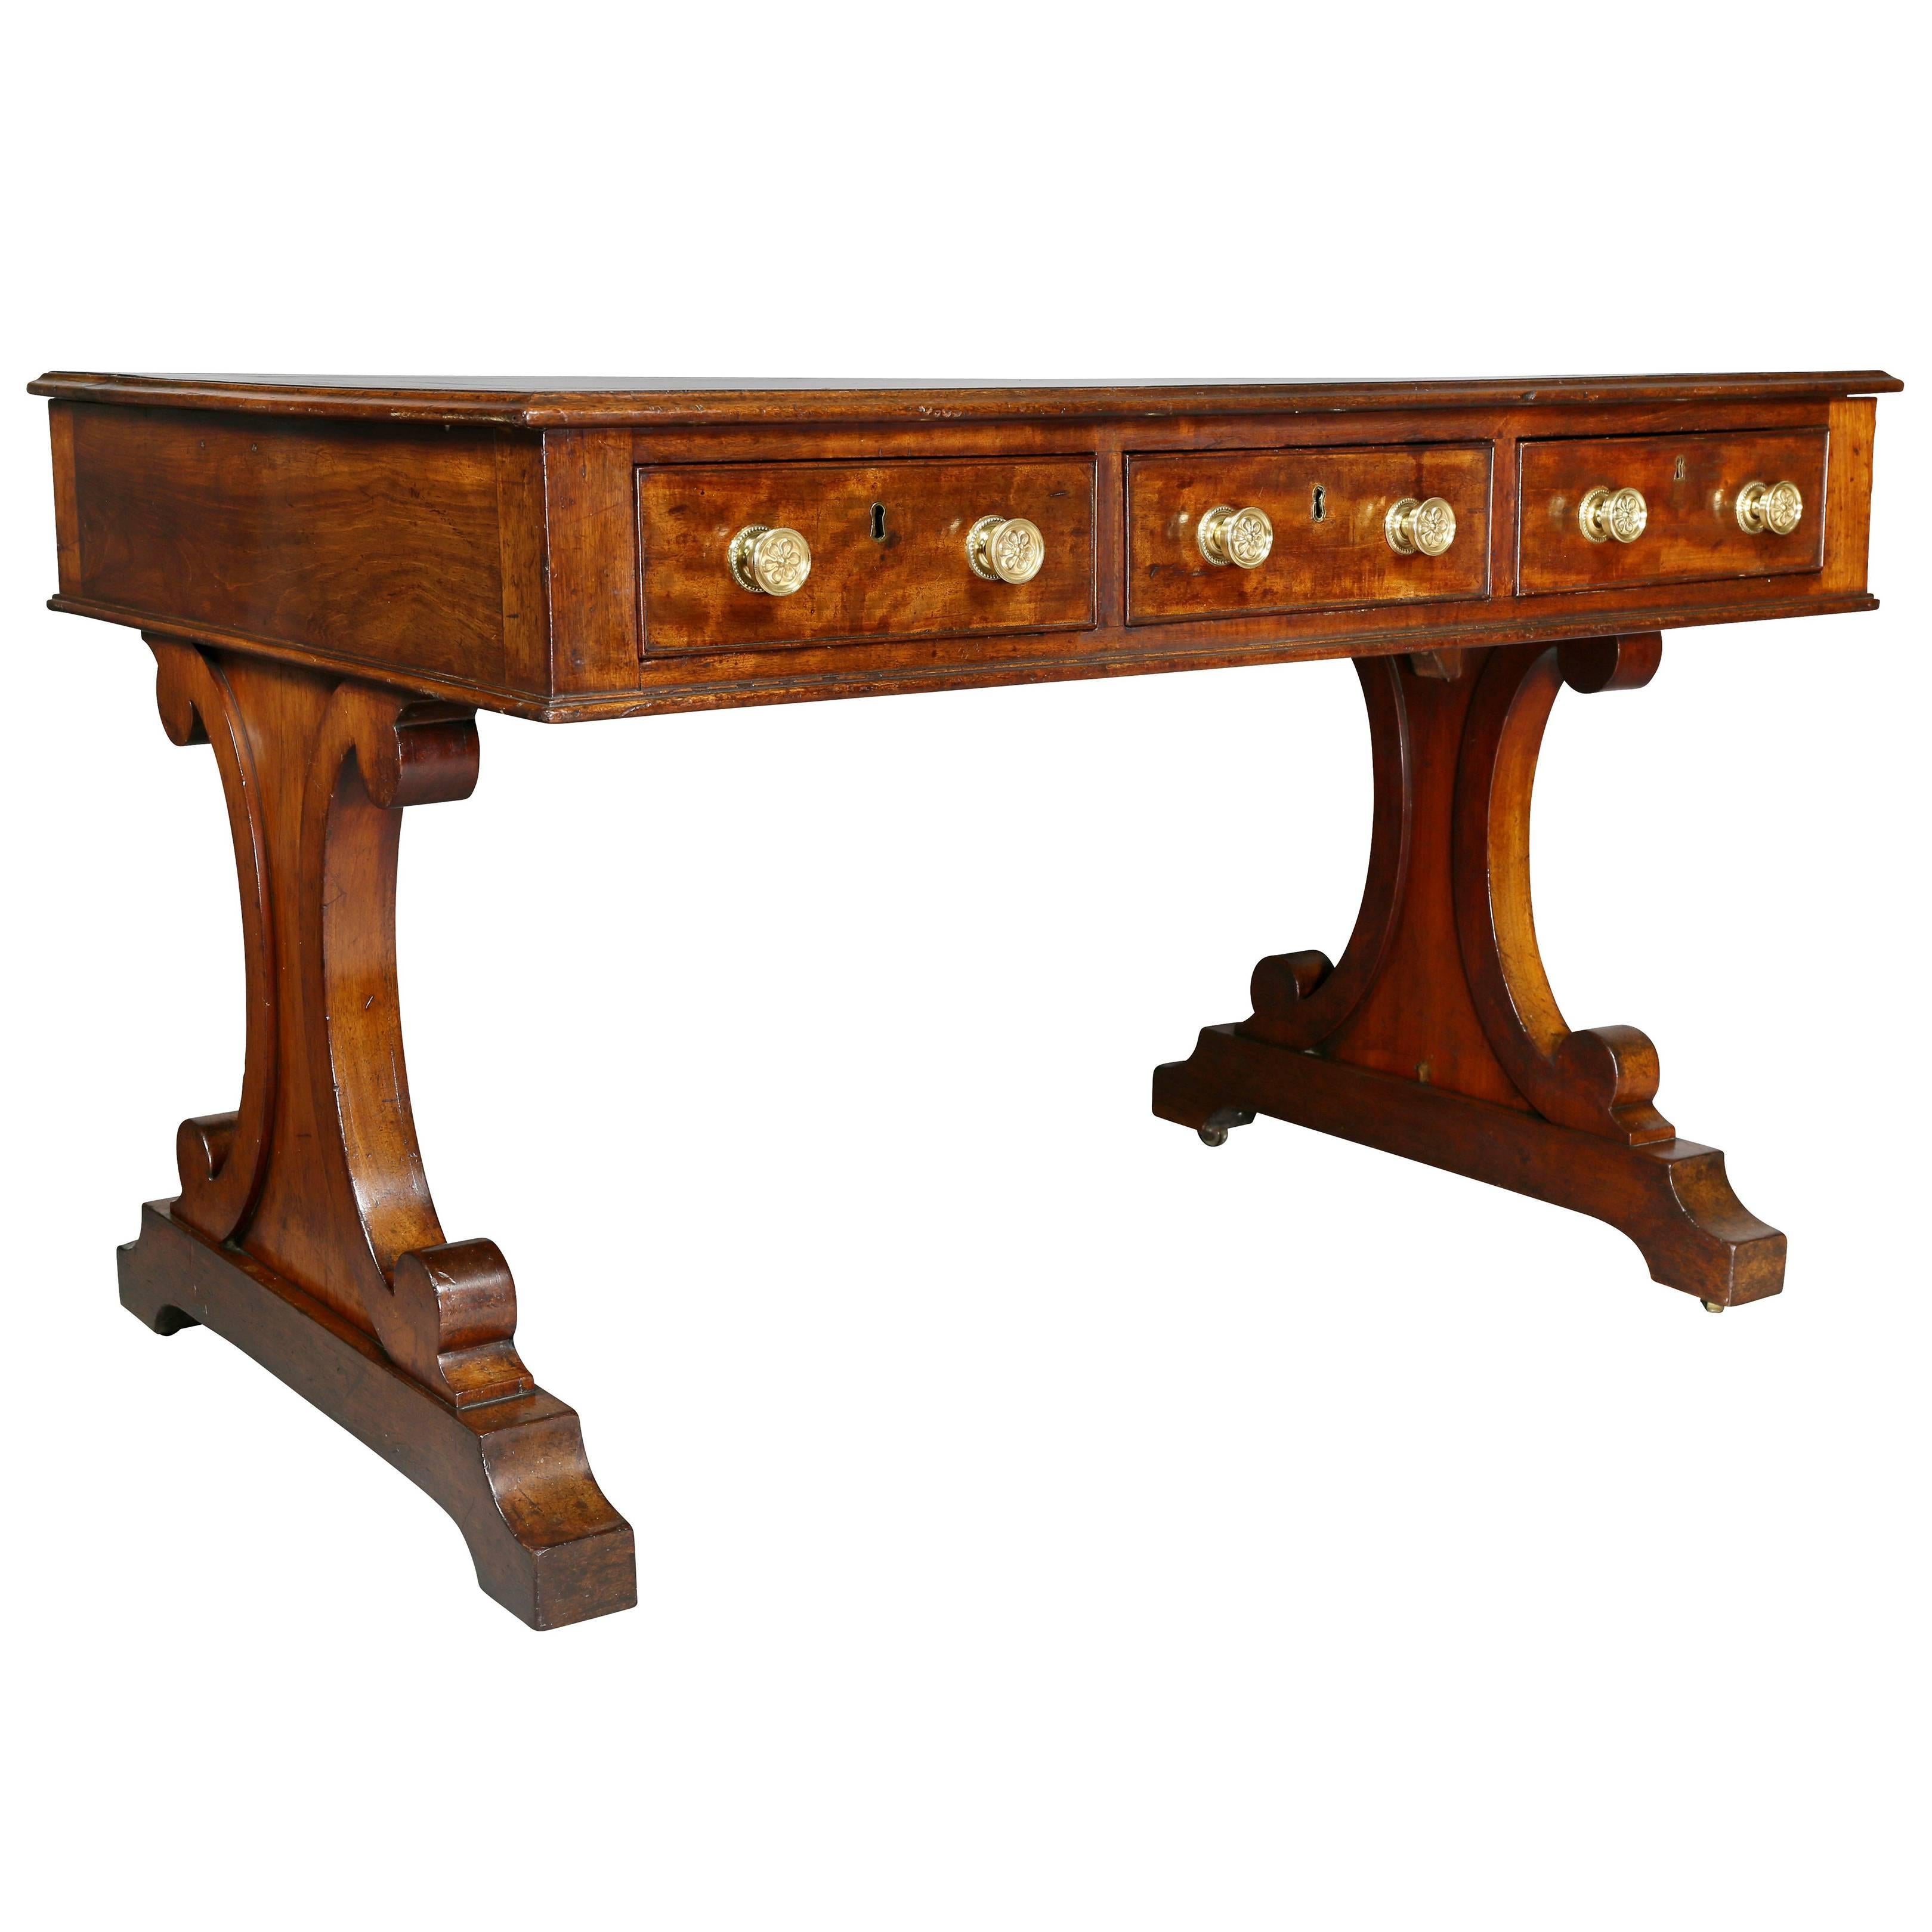 William iv Mahogany Writing Table For Sale